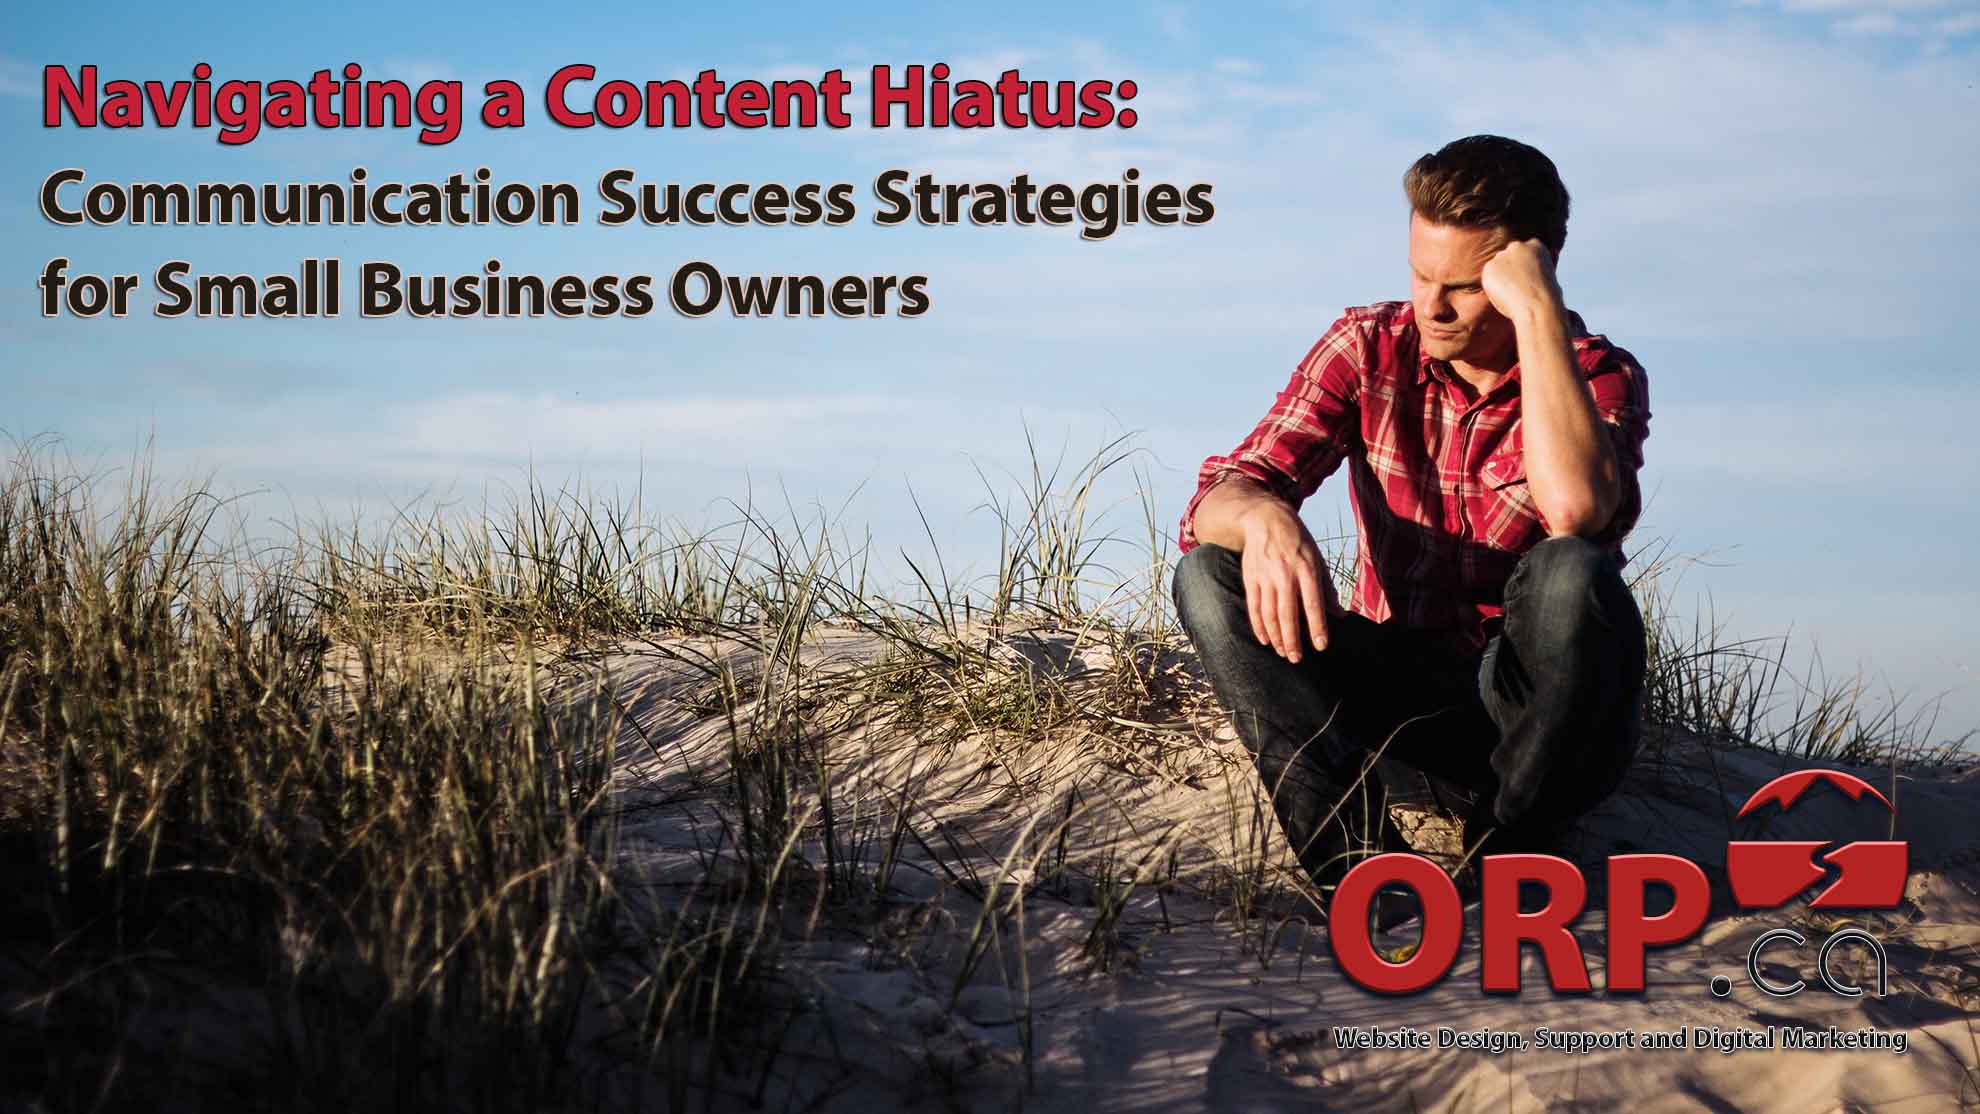 Navigating a Content Hiatus Communication Success Strategies for Small Business Owners - a small business content marketing blog article from ORP.ca - providing website design and development, small business digital marketing and consulting services since 2003